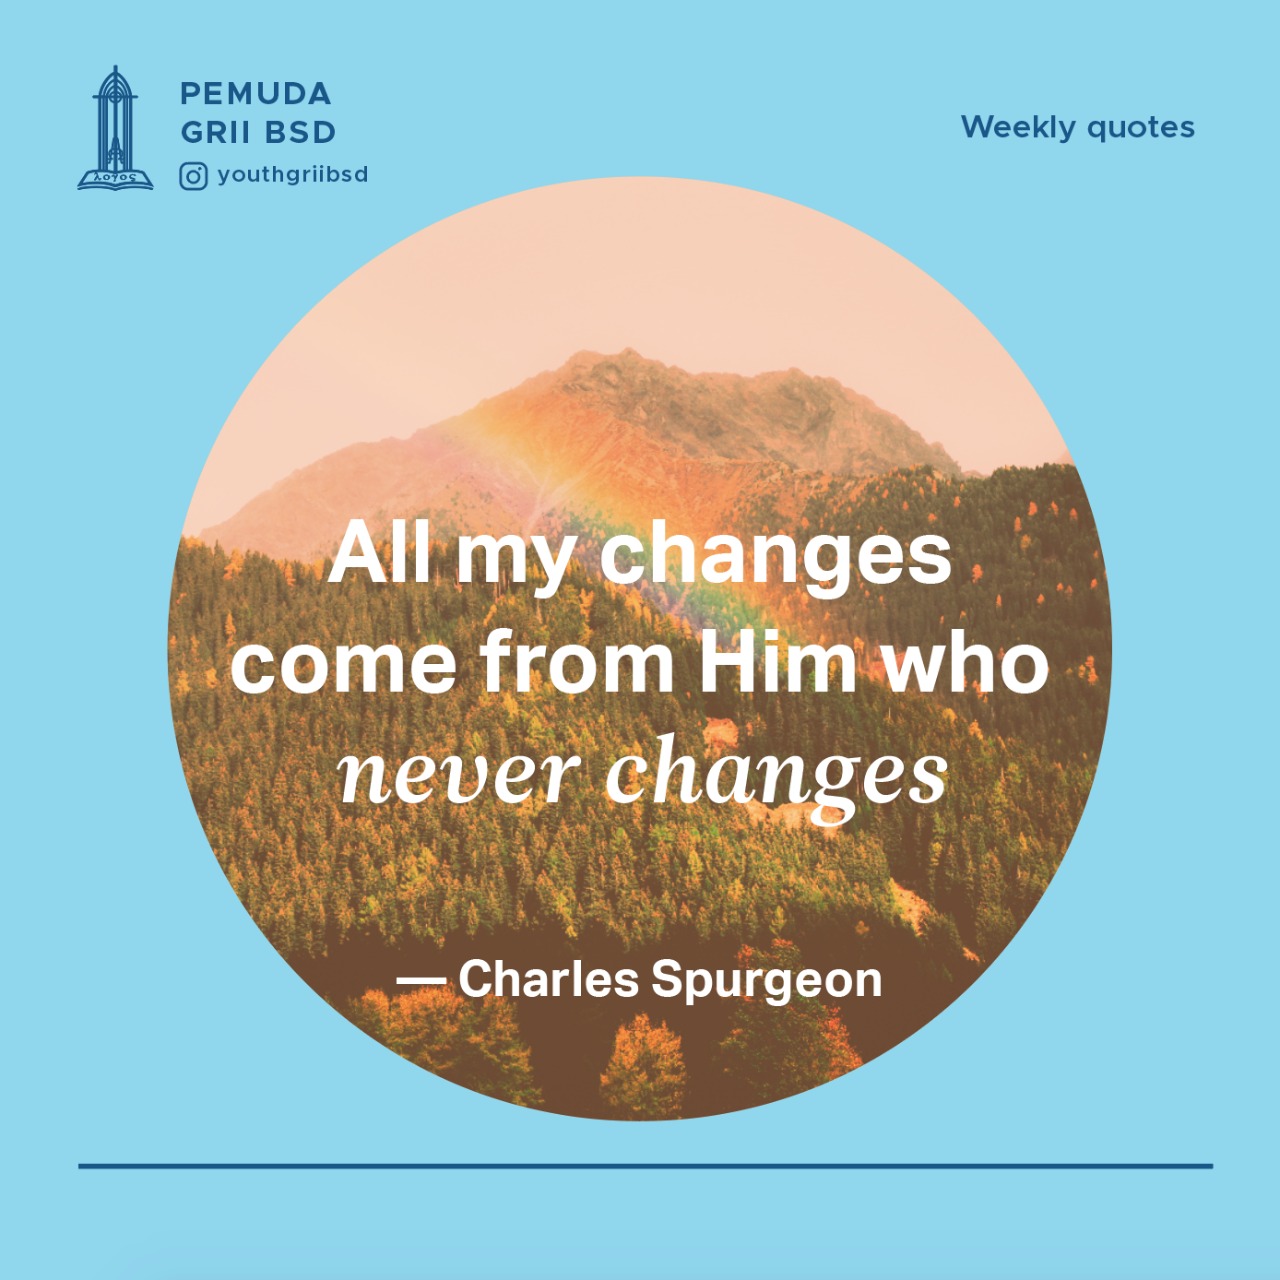 All my changes come from Him who never changes.